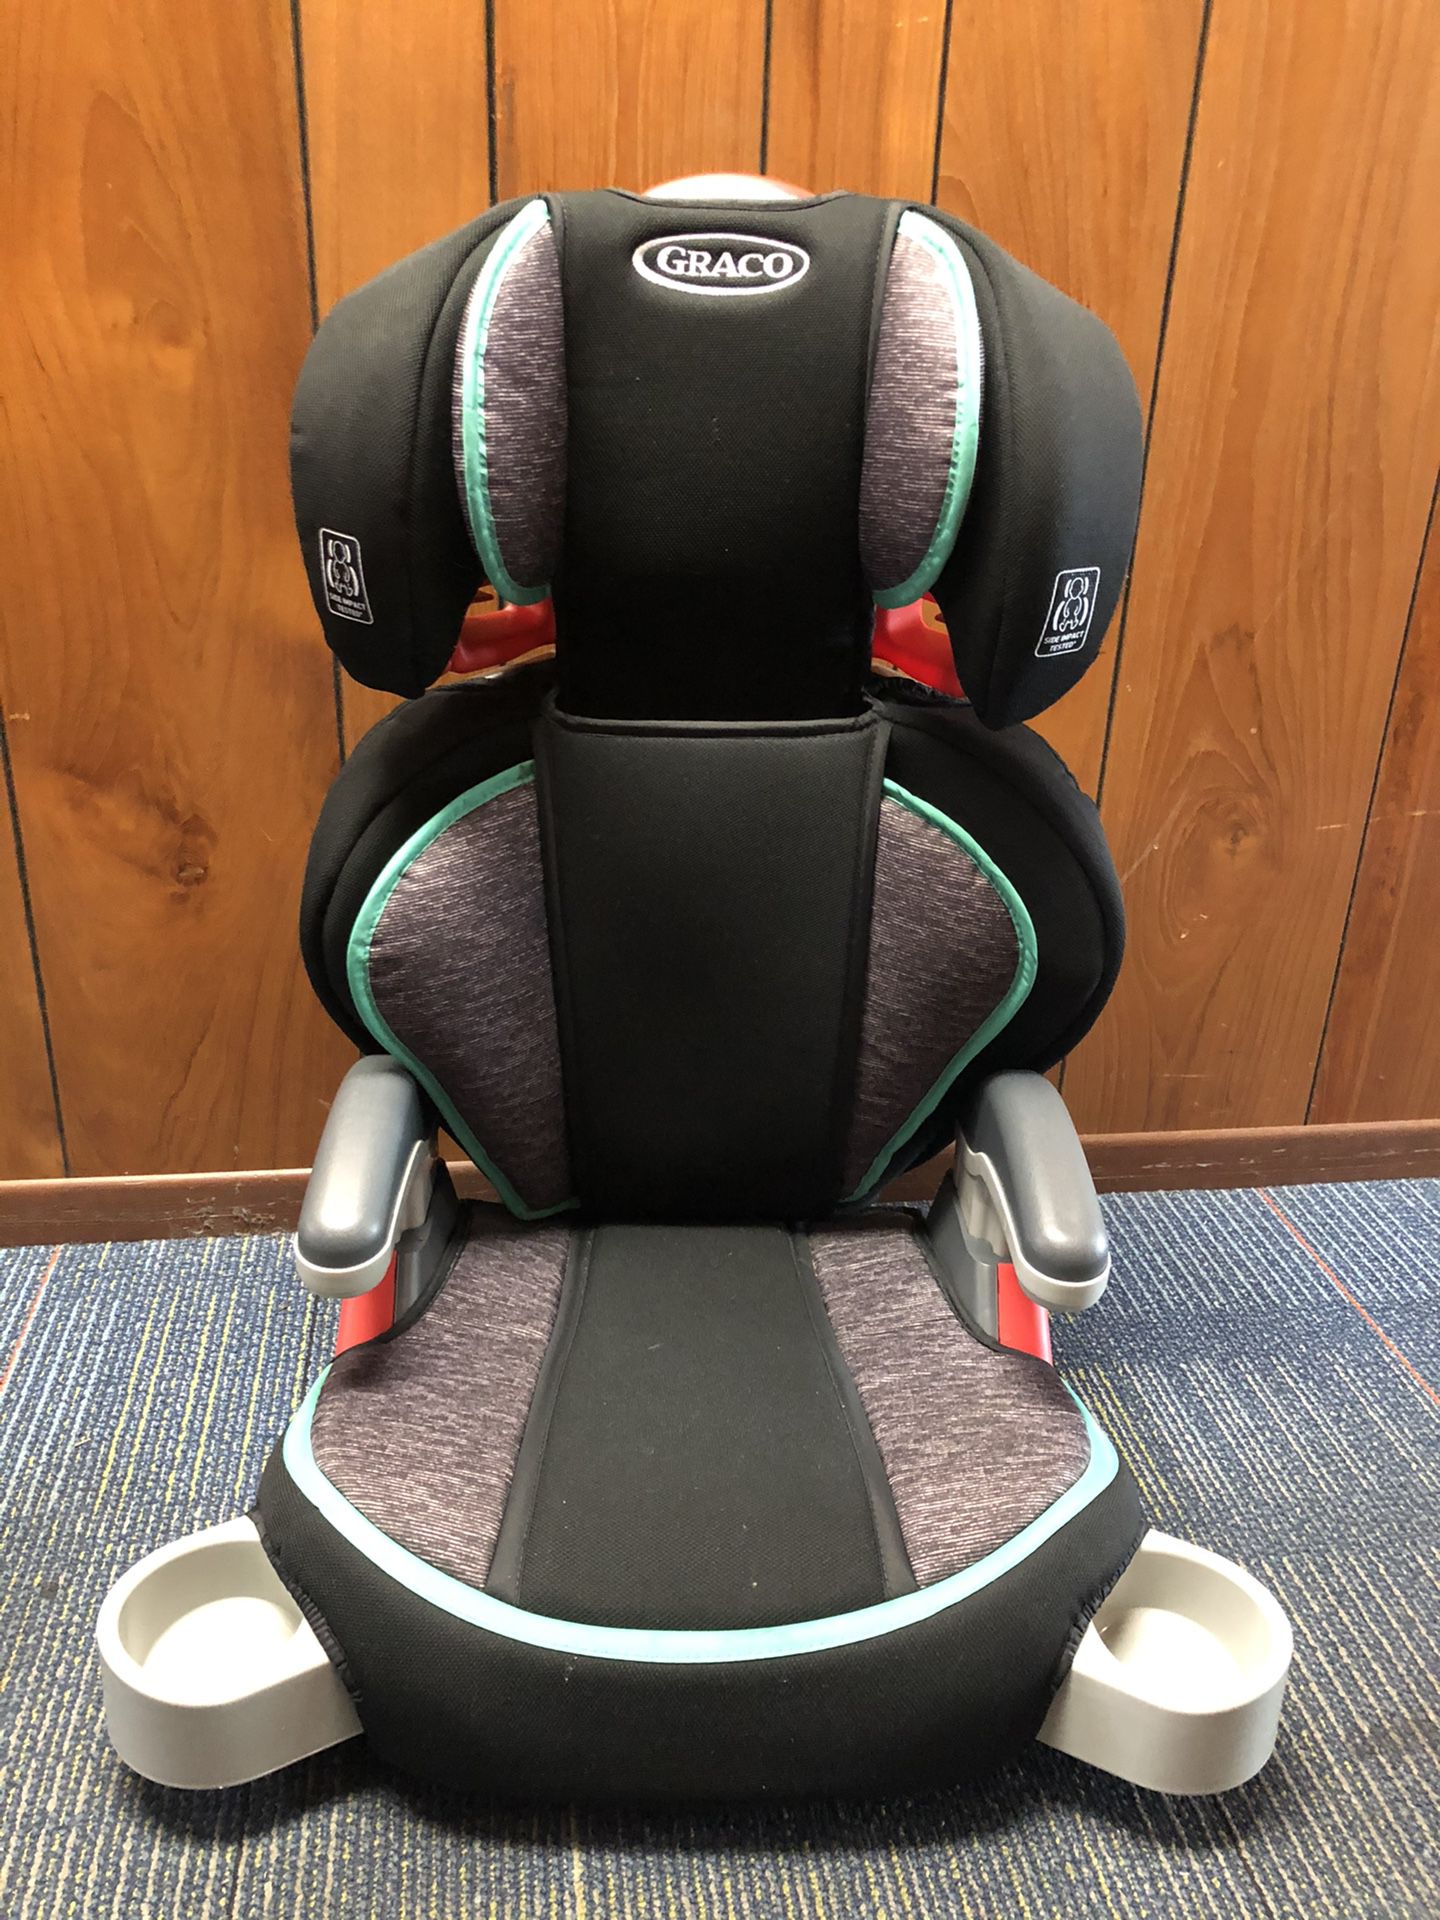 Convertible graco booster seat